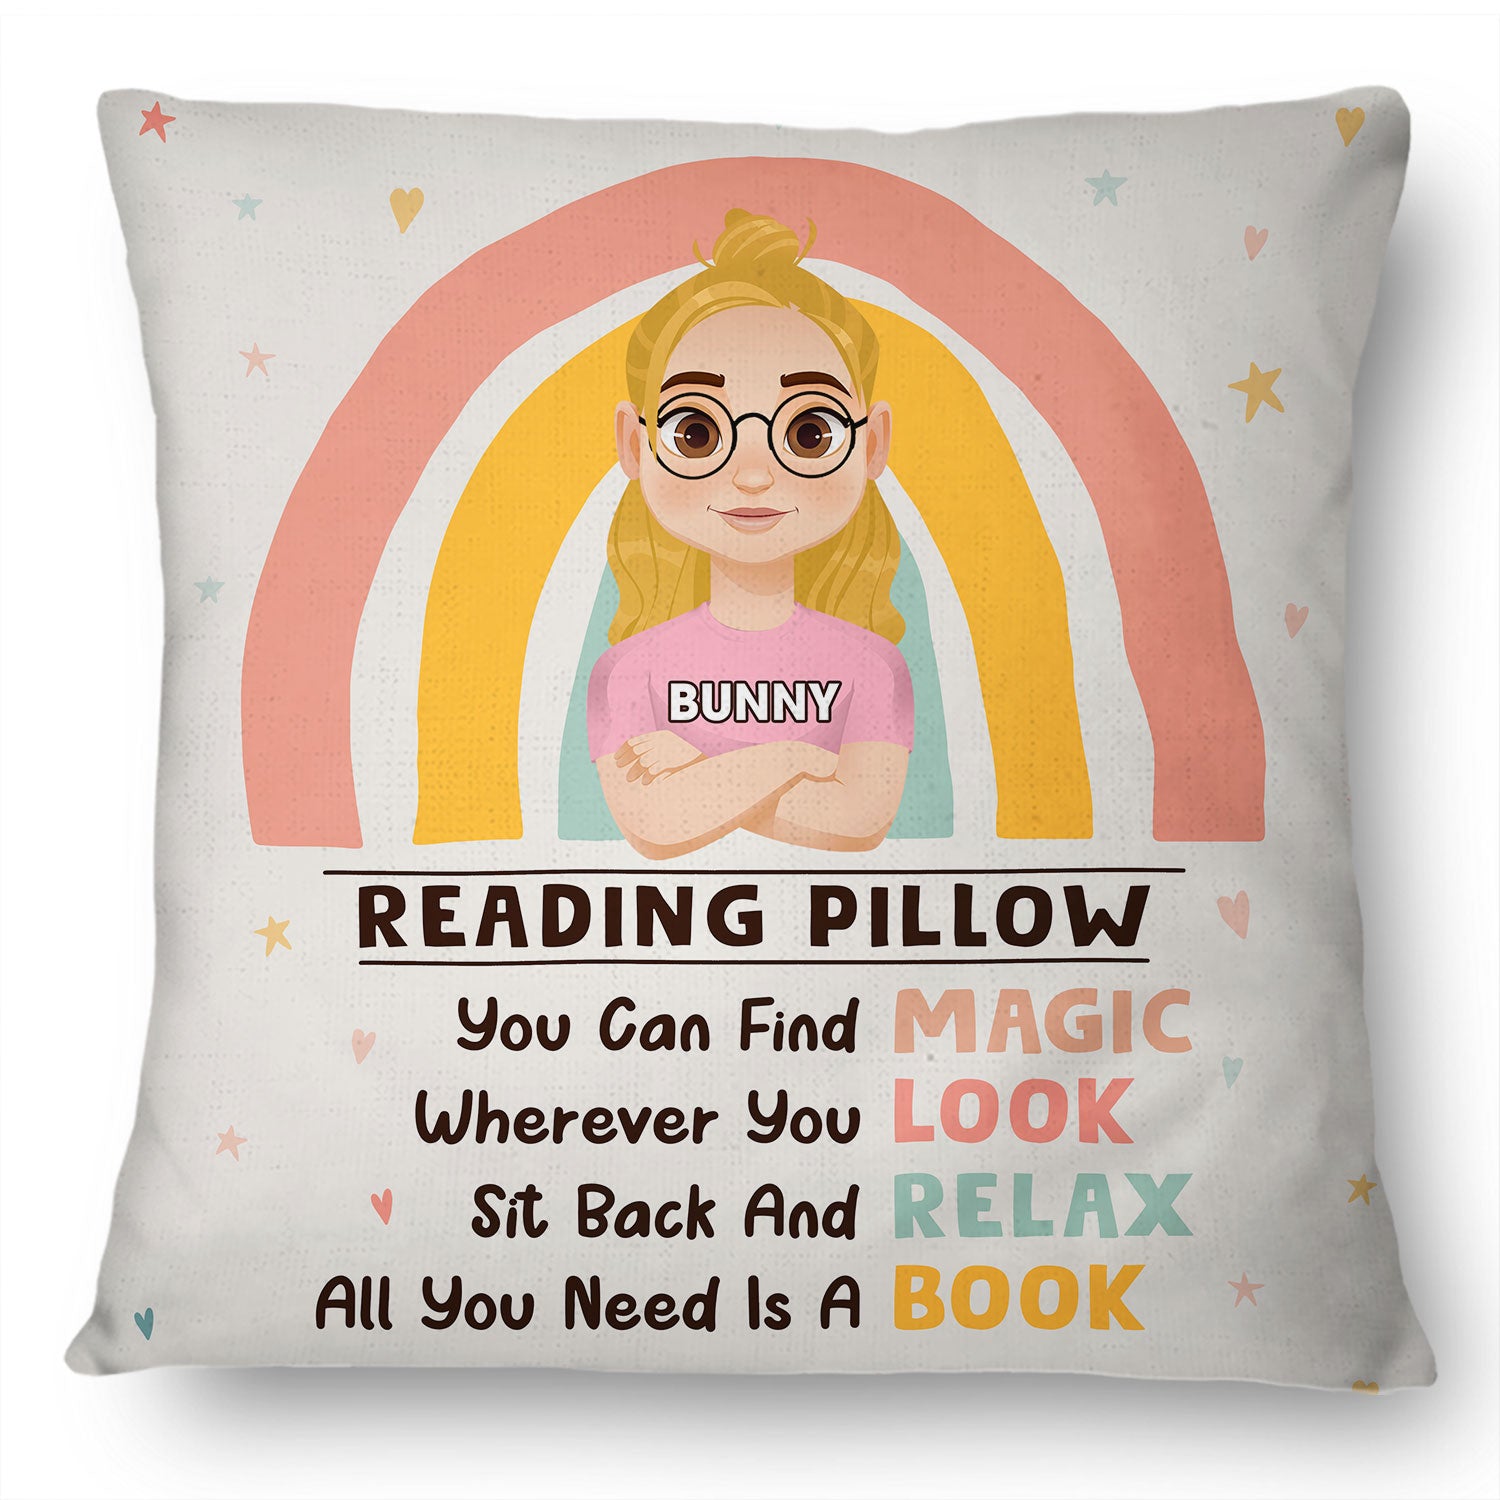 Reading All You Need Is A Book - Gift For Kids - Personalized Pillow